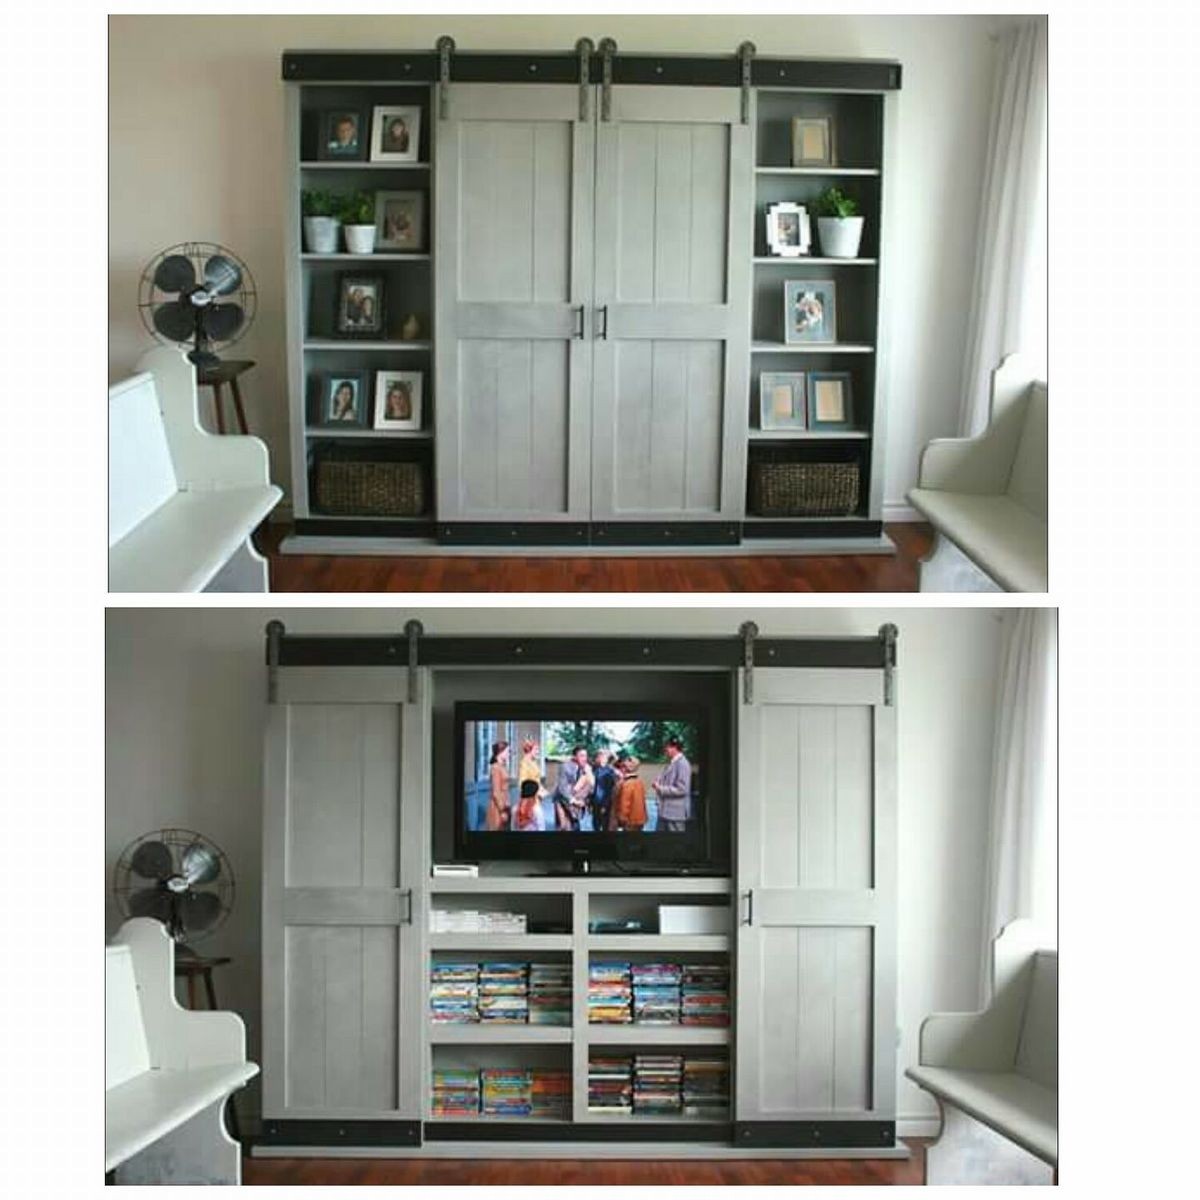 Ana white sliding door cabinet for tv diy projects